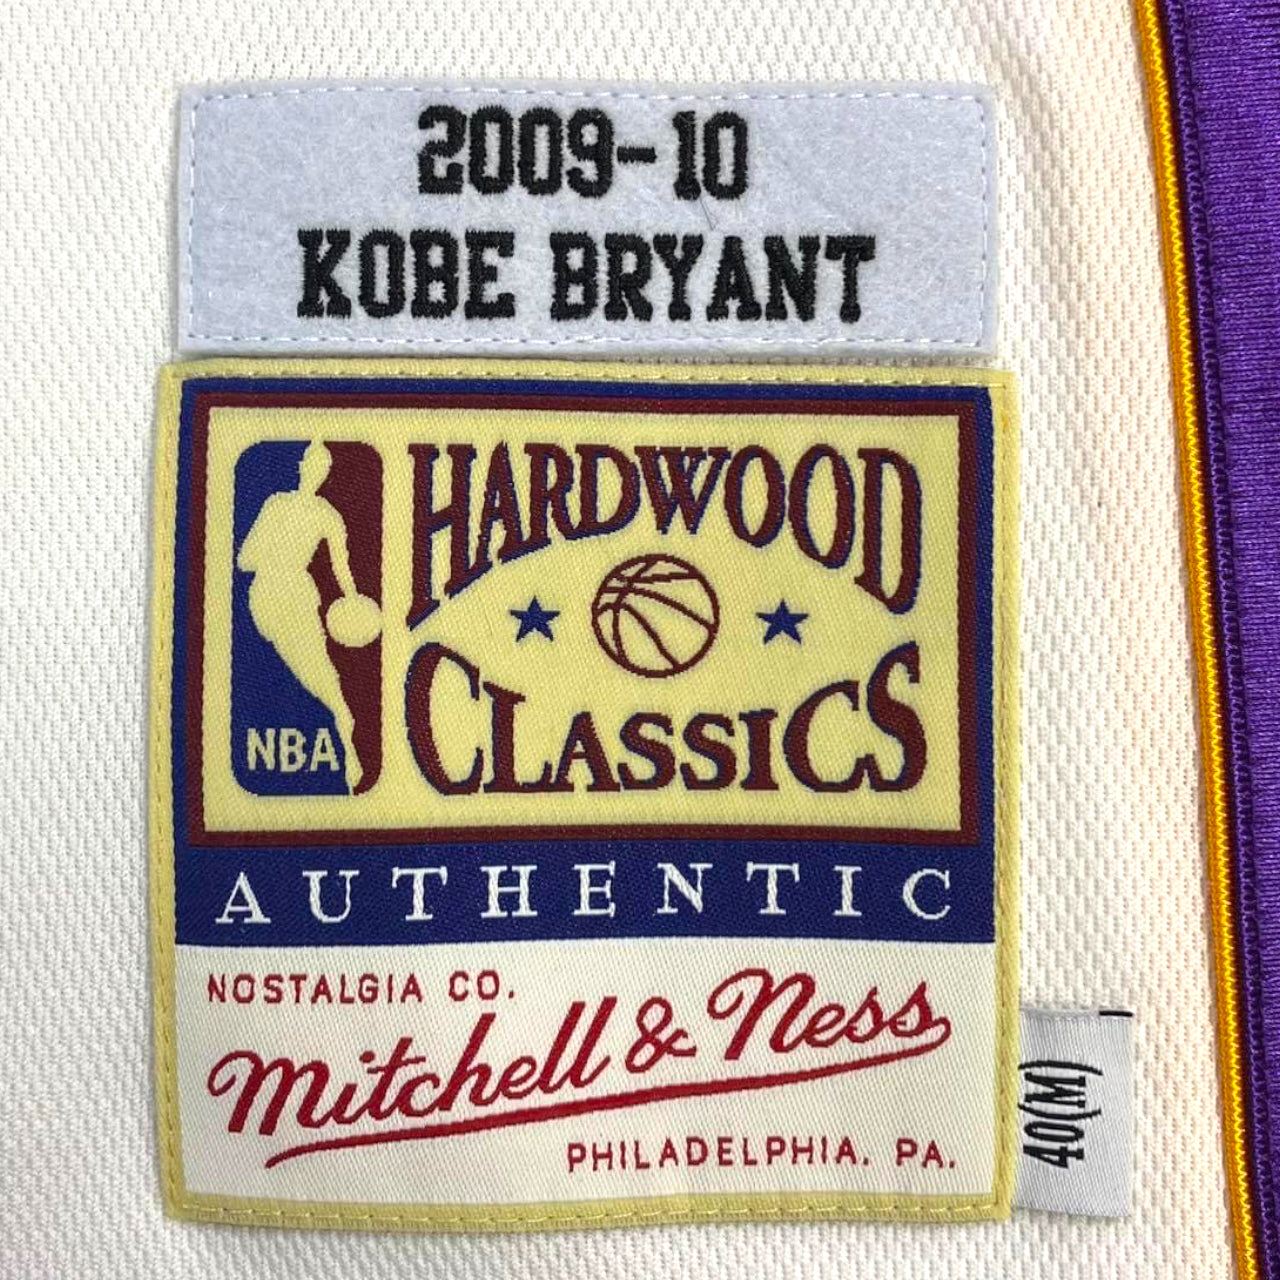 Mitchell and Ness Kobe Bryant Los Angeles Lakers 2009-2010 NBA Finals Alternate Authentic Jersey - White #24 - Hoop Jersey Store